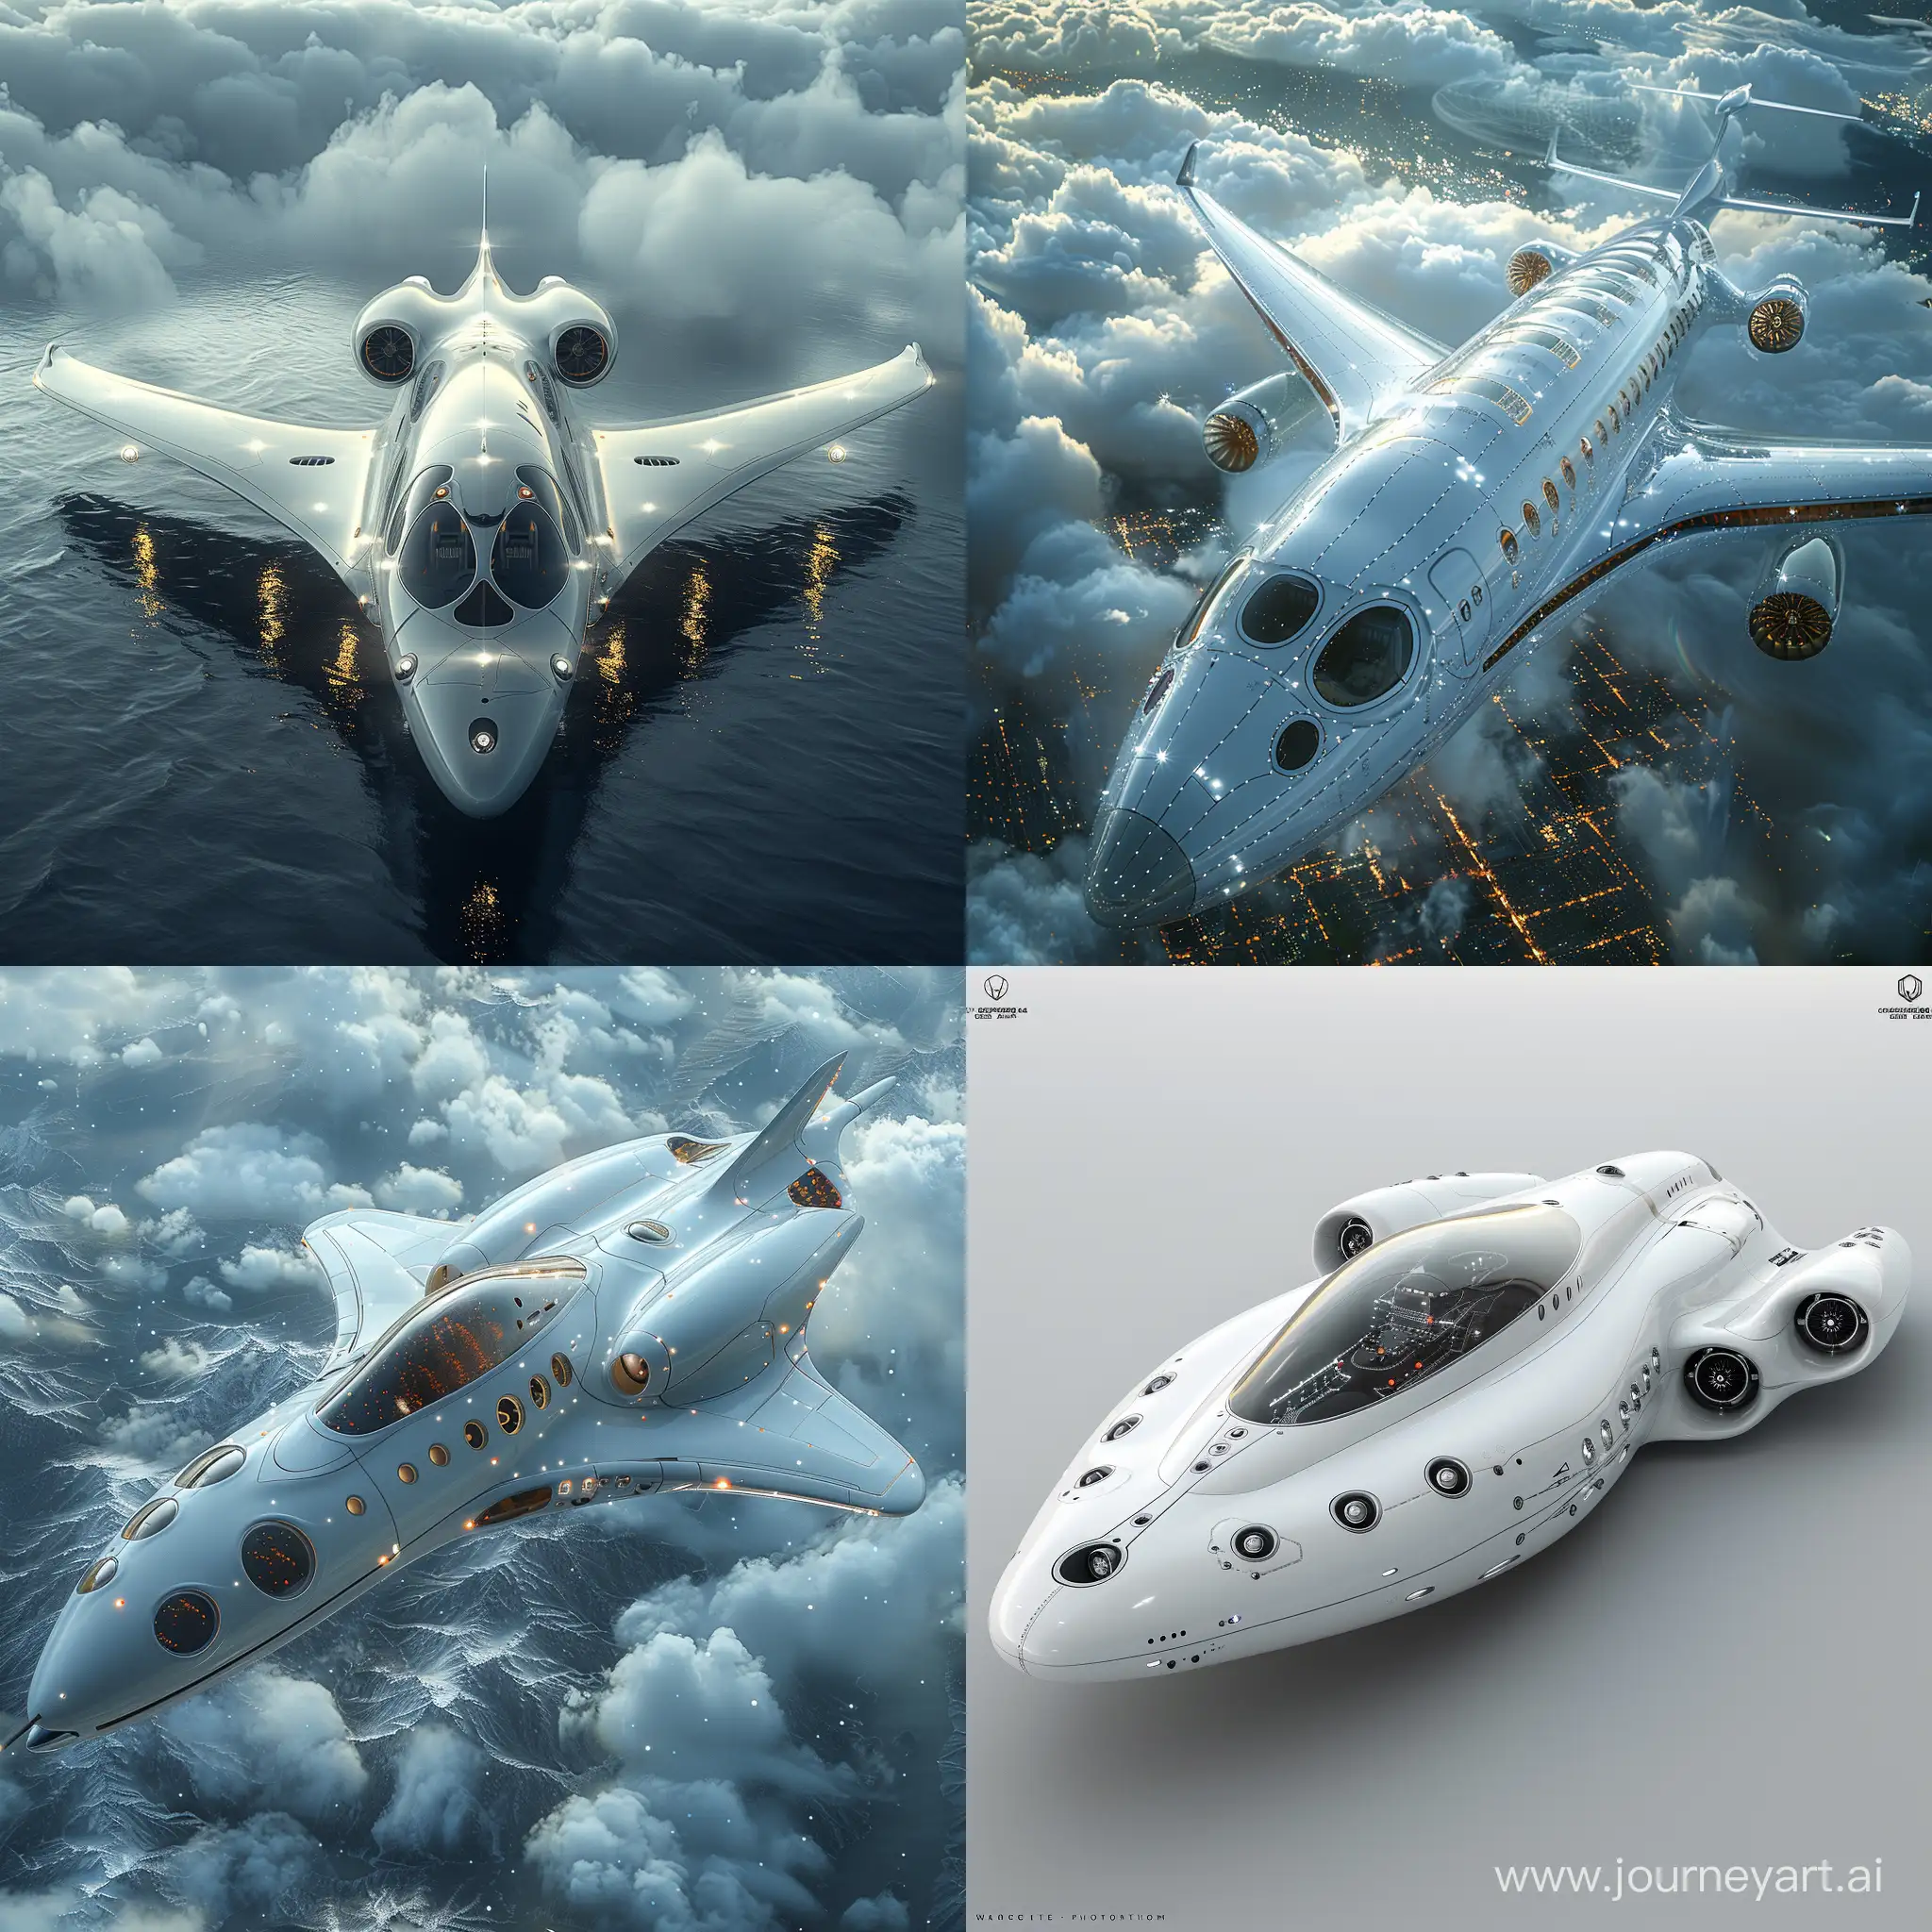 Futuristic-HighTech-Passenger-Airplane-with-Advanced-Composite-Materials